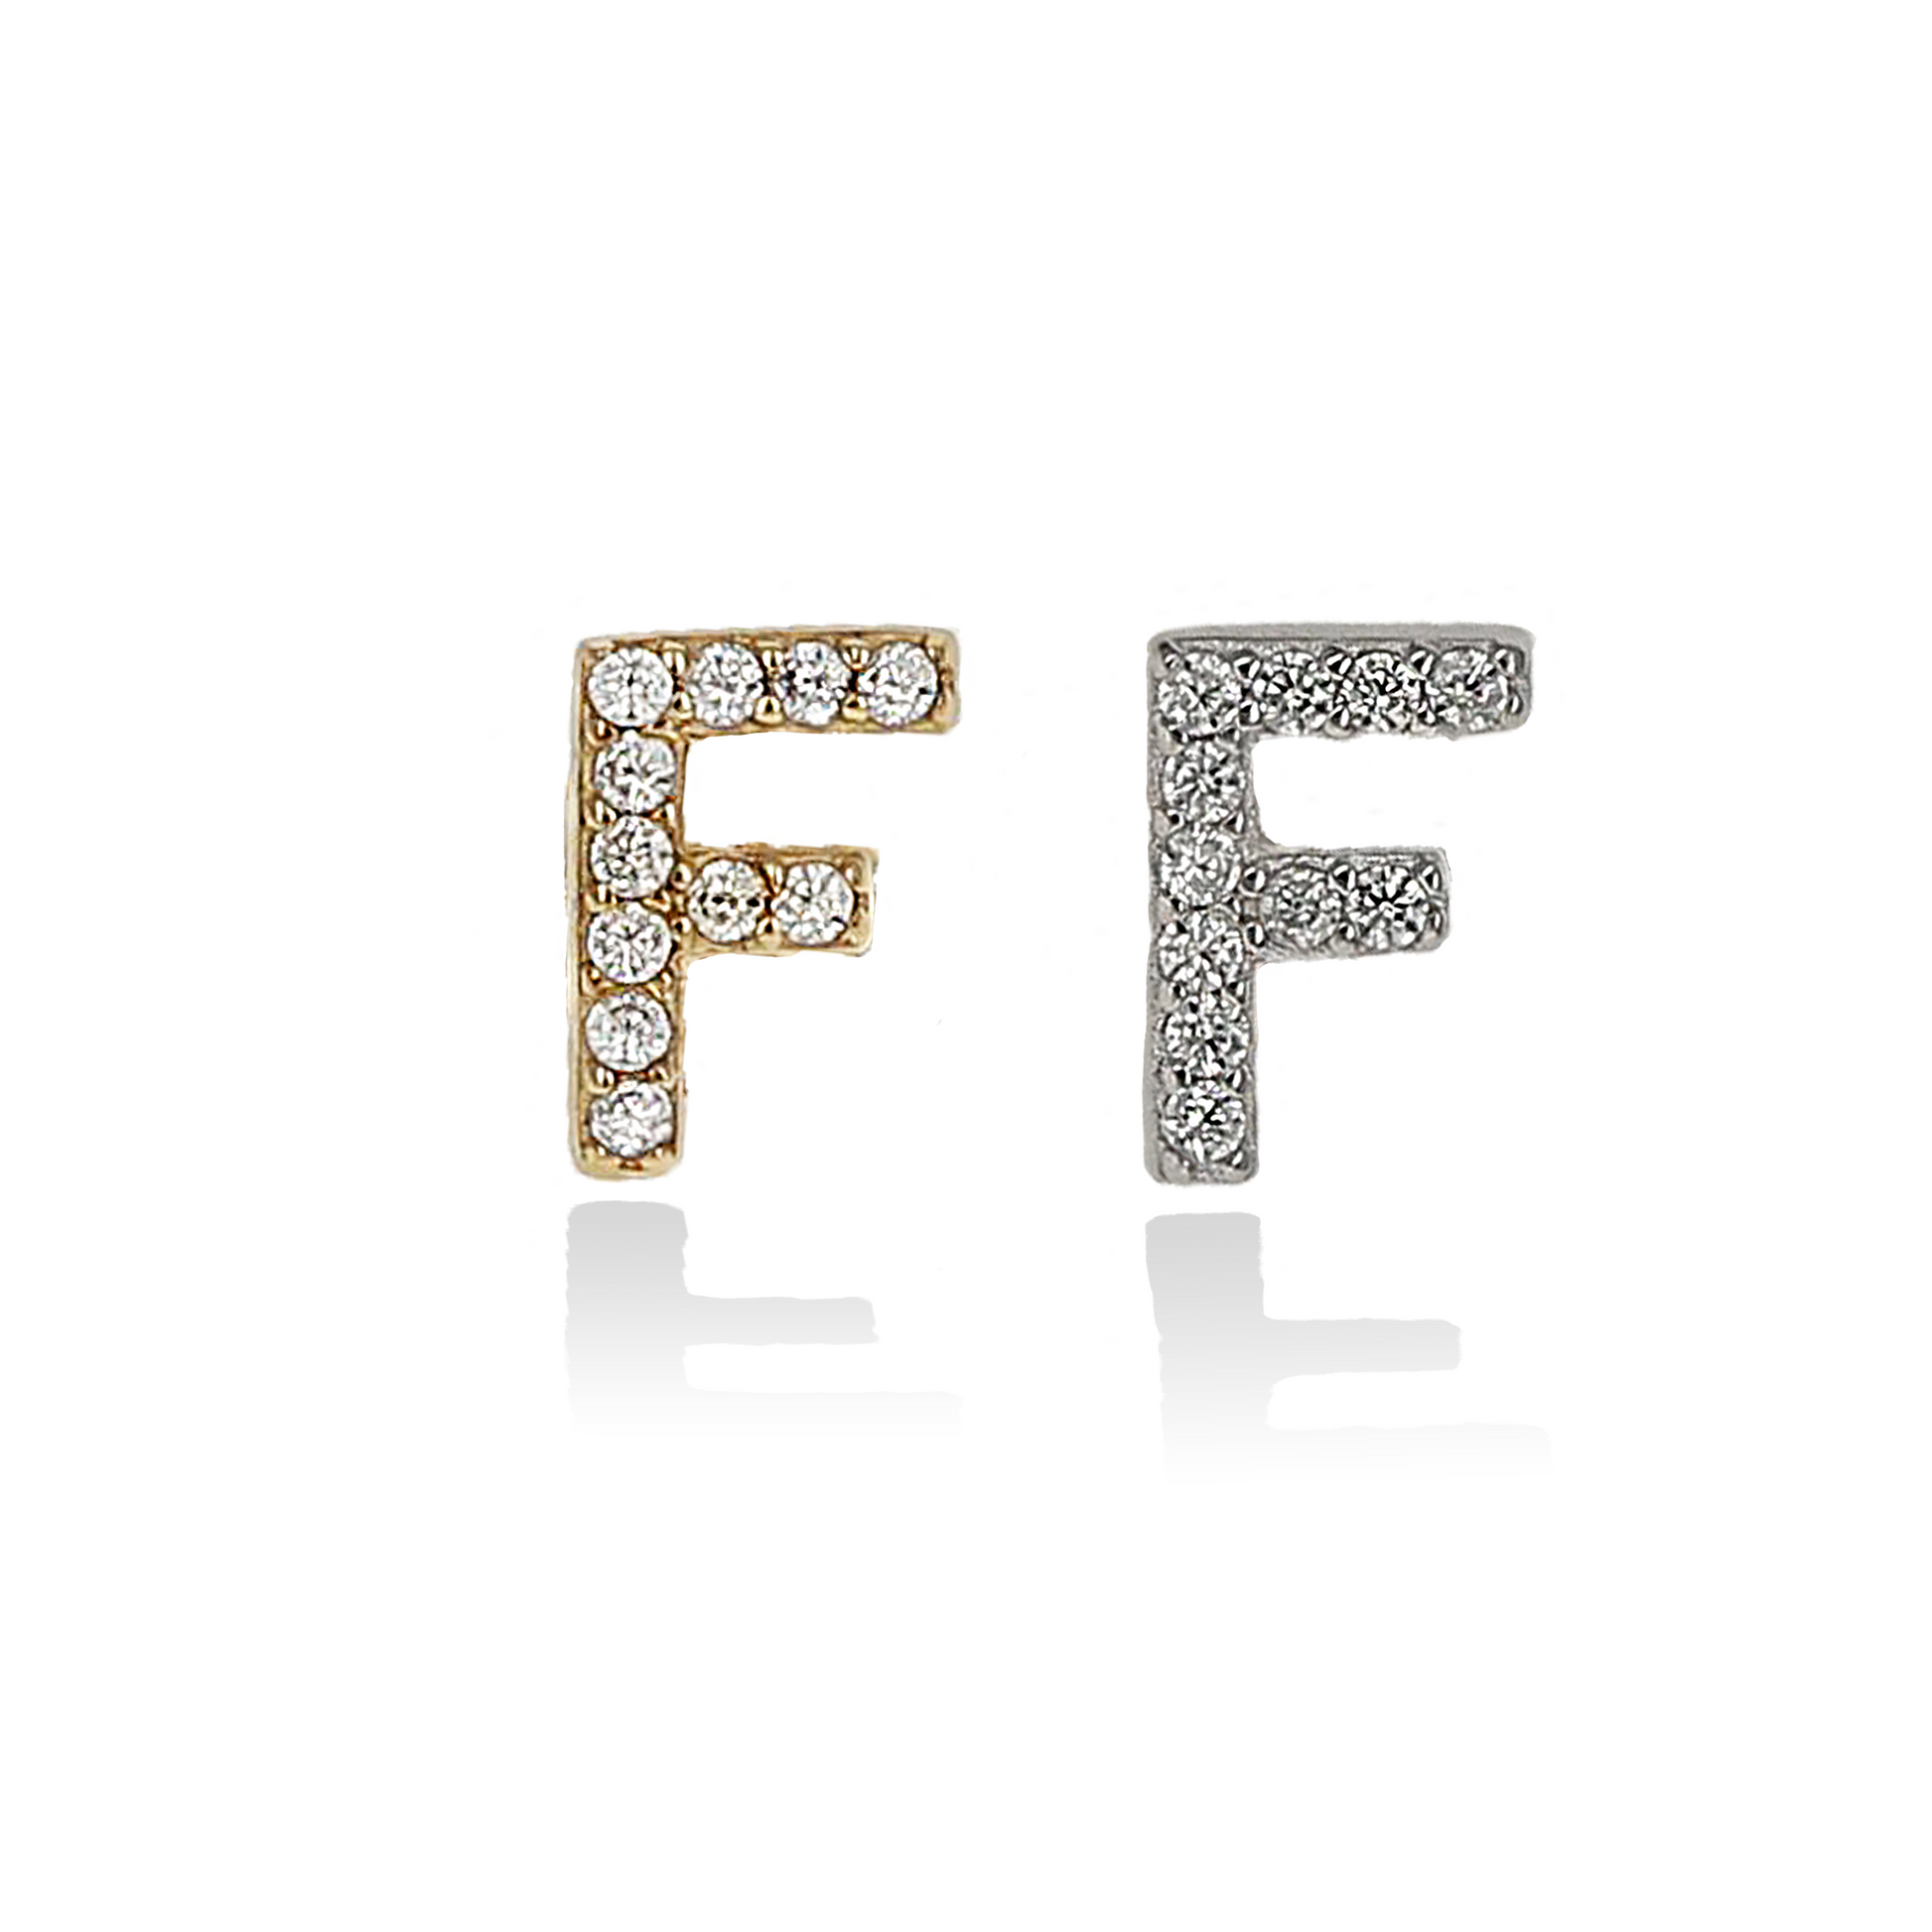 Individual Letter F Initial Stud Earrings - Alexandra Marks Jewelry